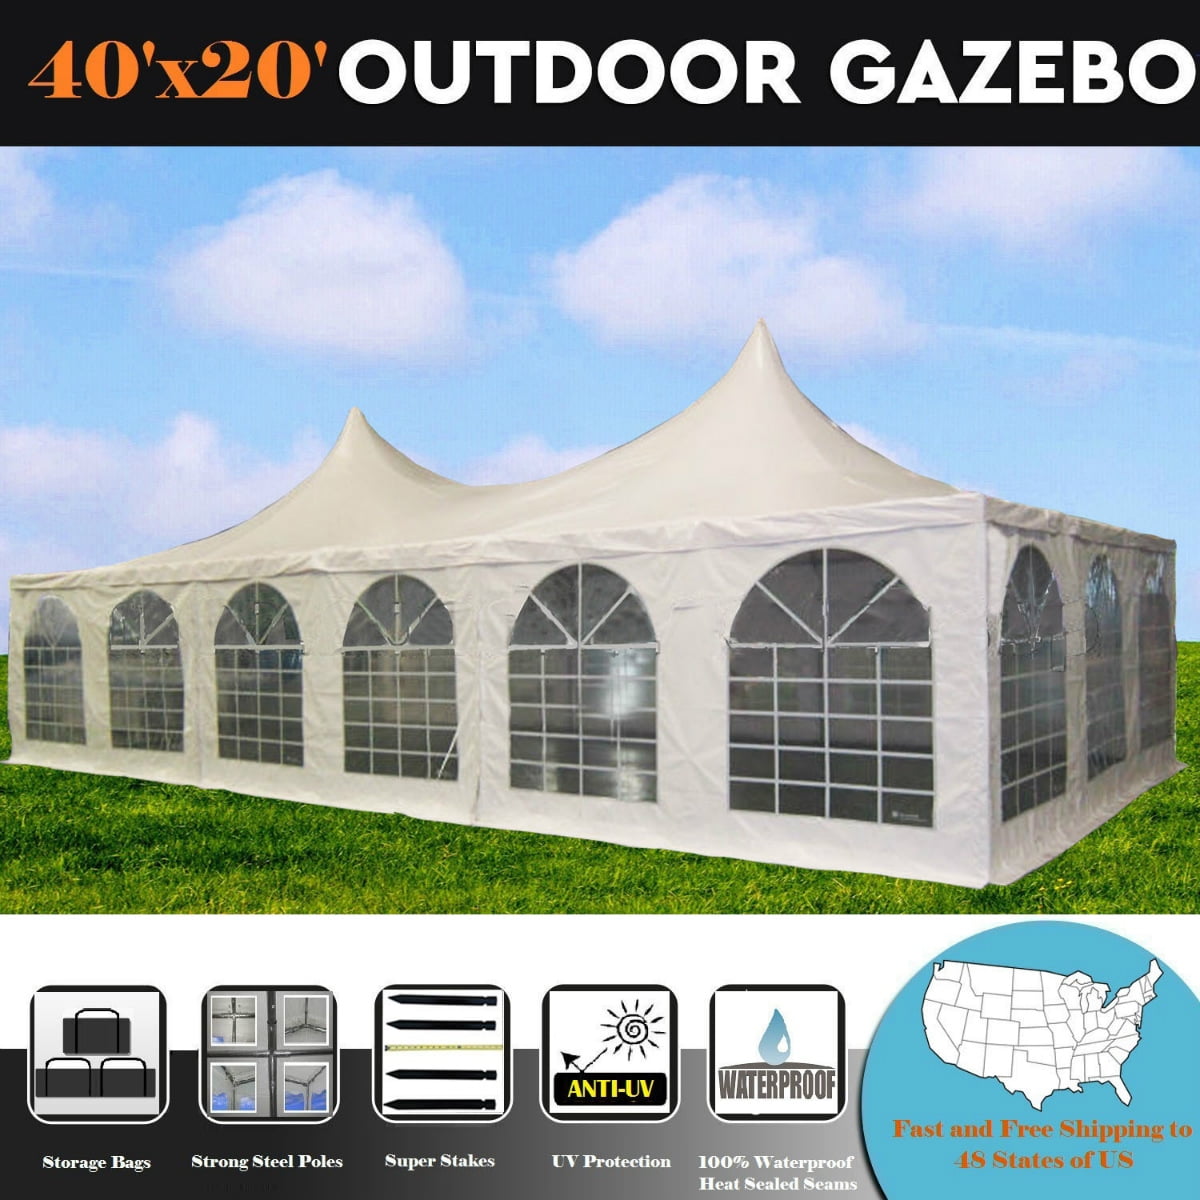 Storage Bags Included 40'x20' PVC Frame Tent Party Wedding Canopy 30'x20' 